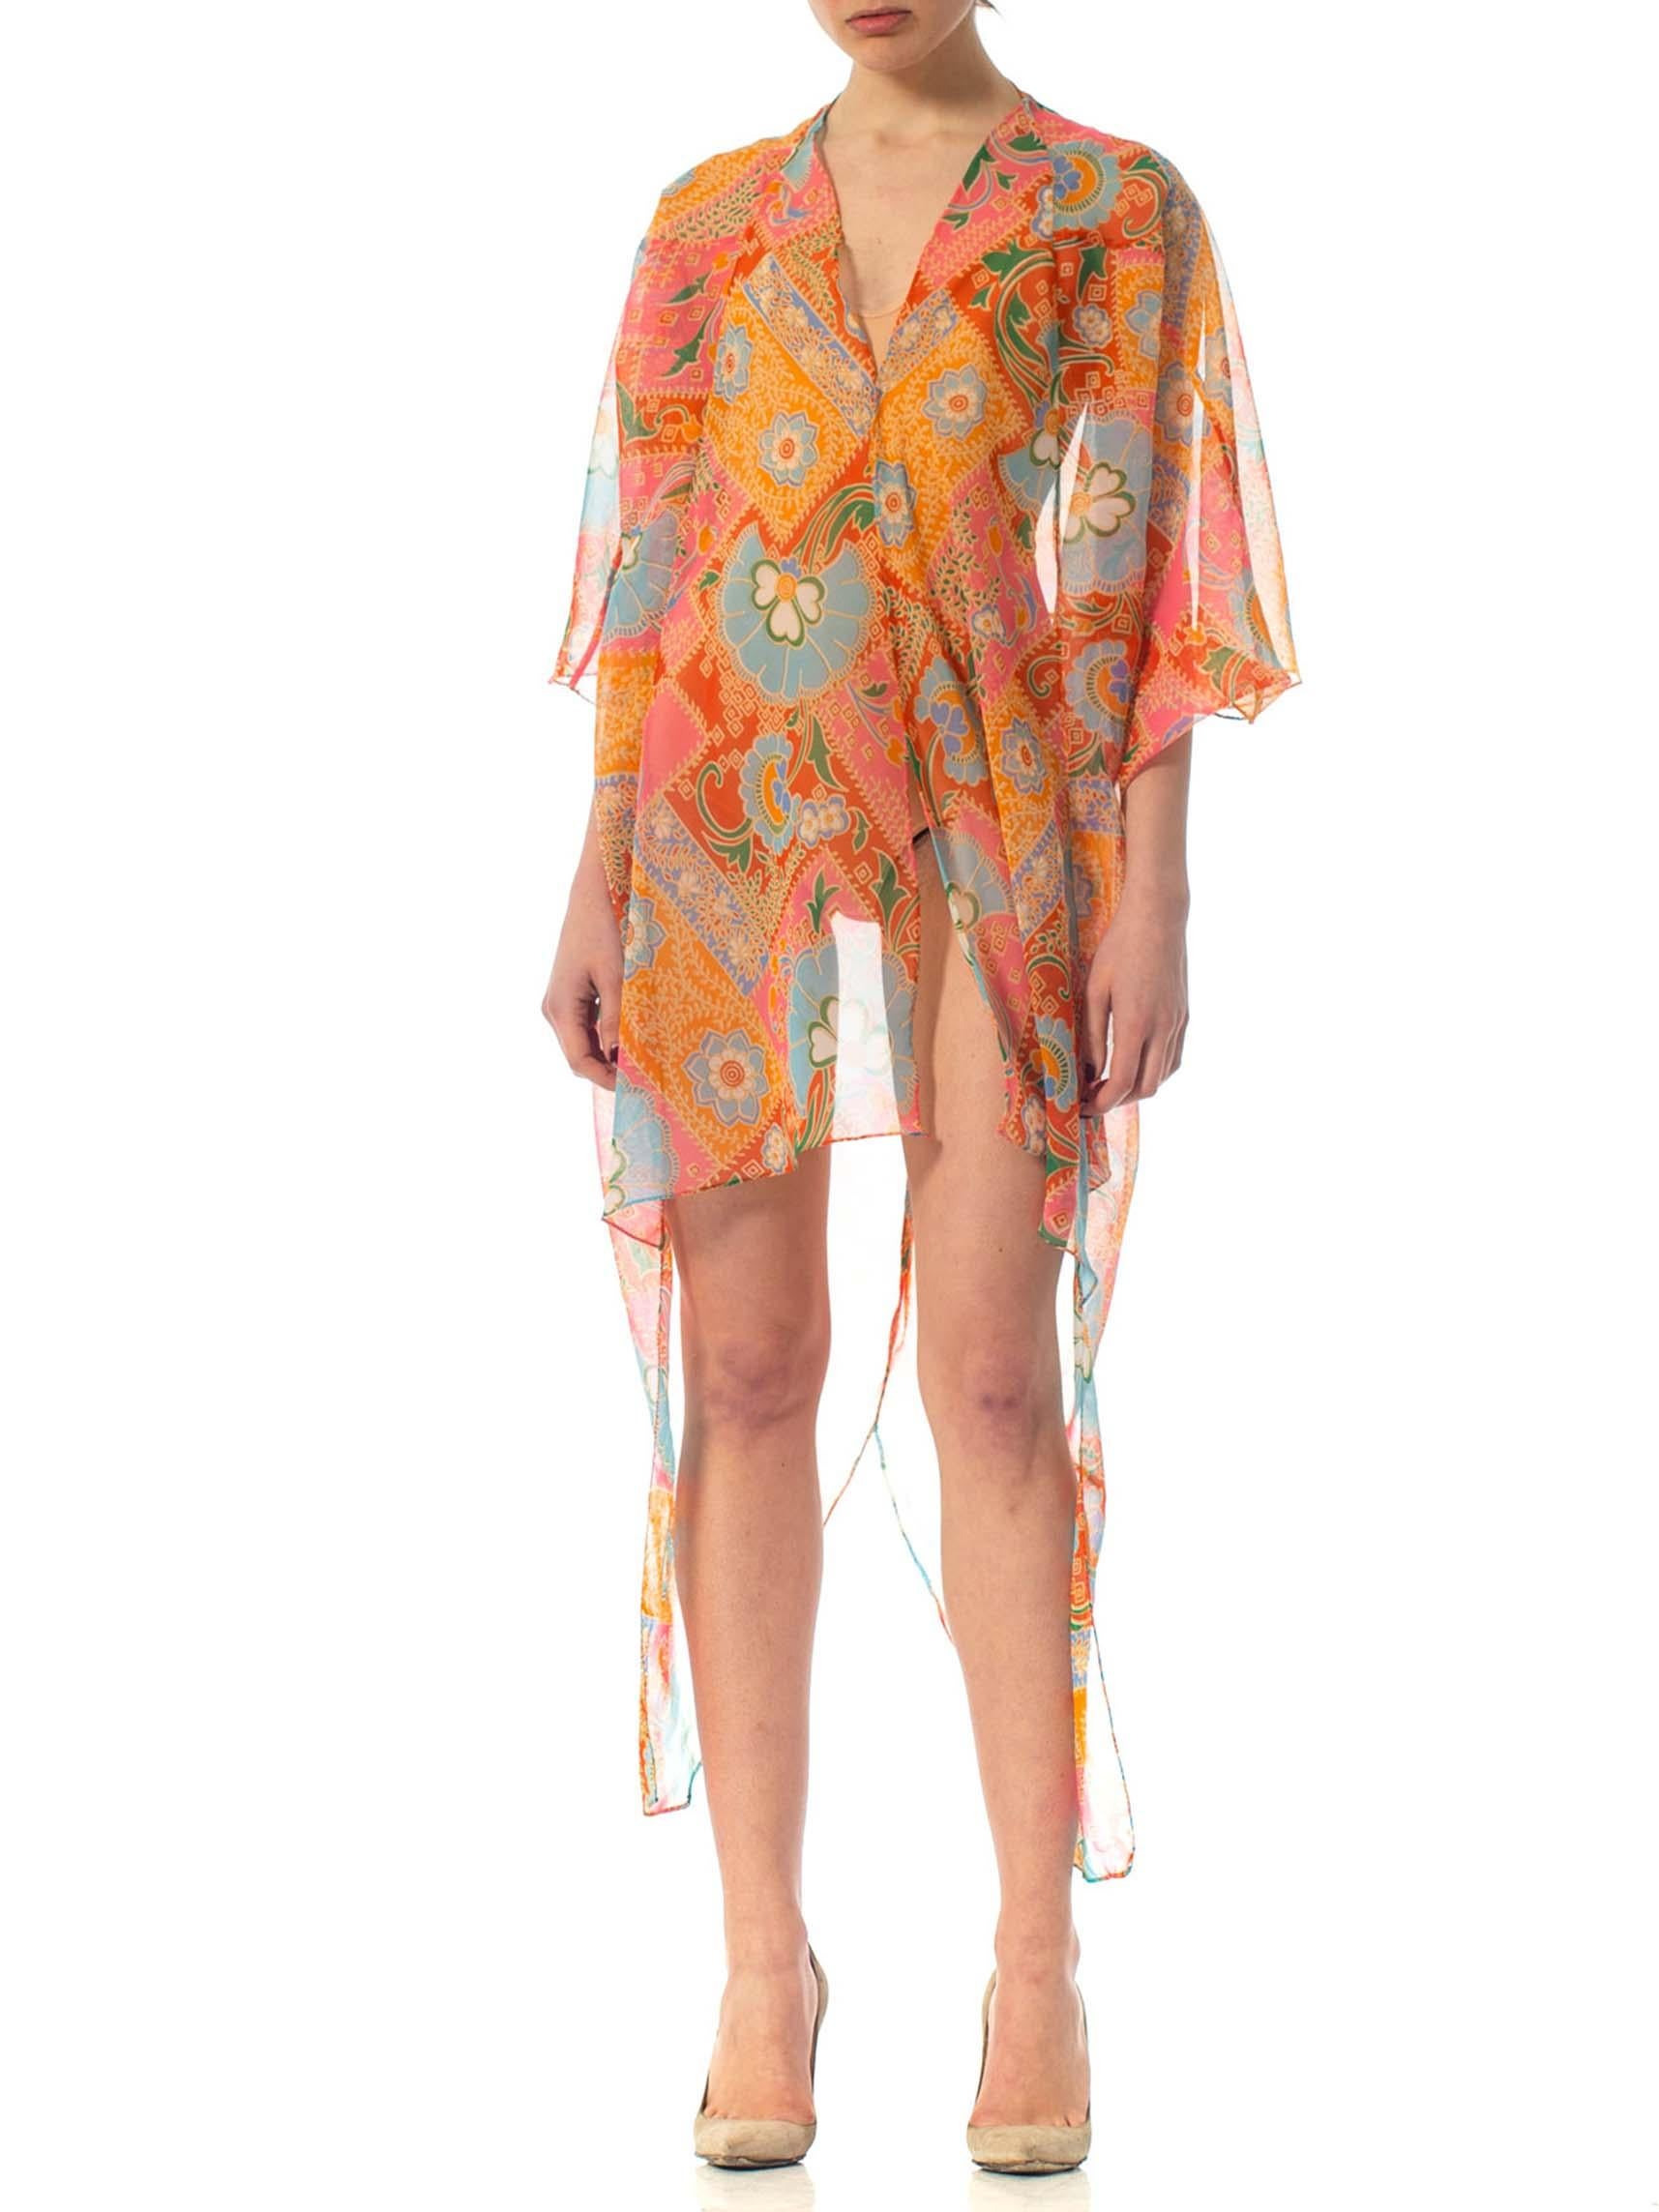 Orange MORPHEW COLLECTION Psychedelic Polyester Organza Beach Cover-Up Cocoon